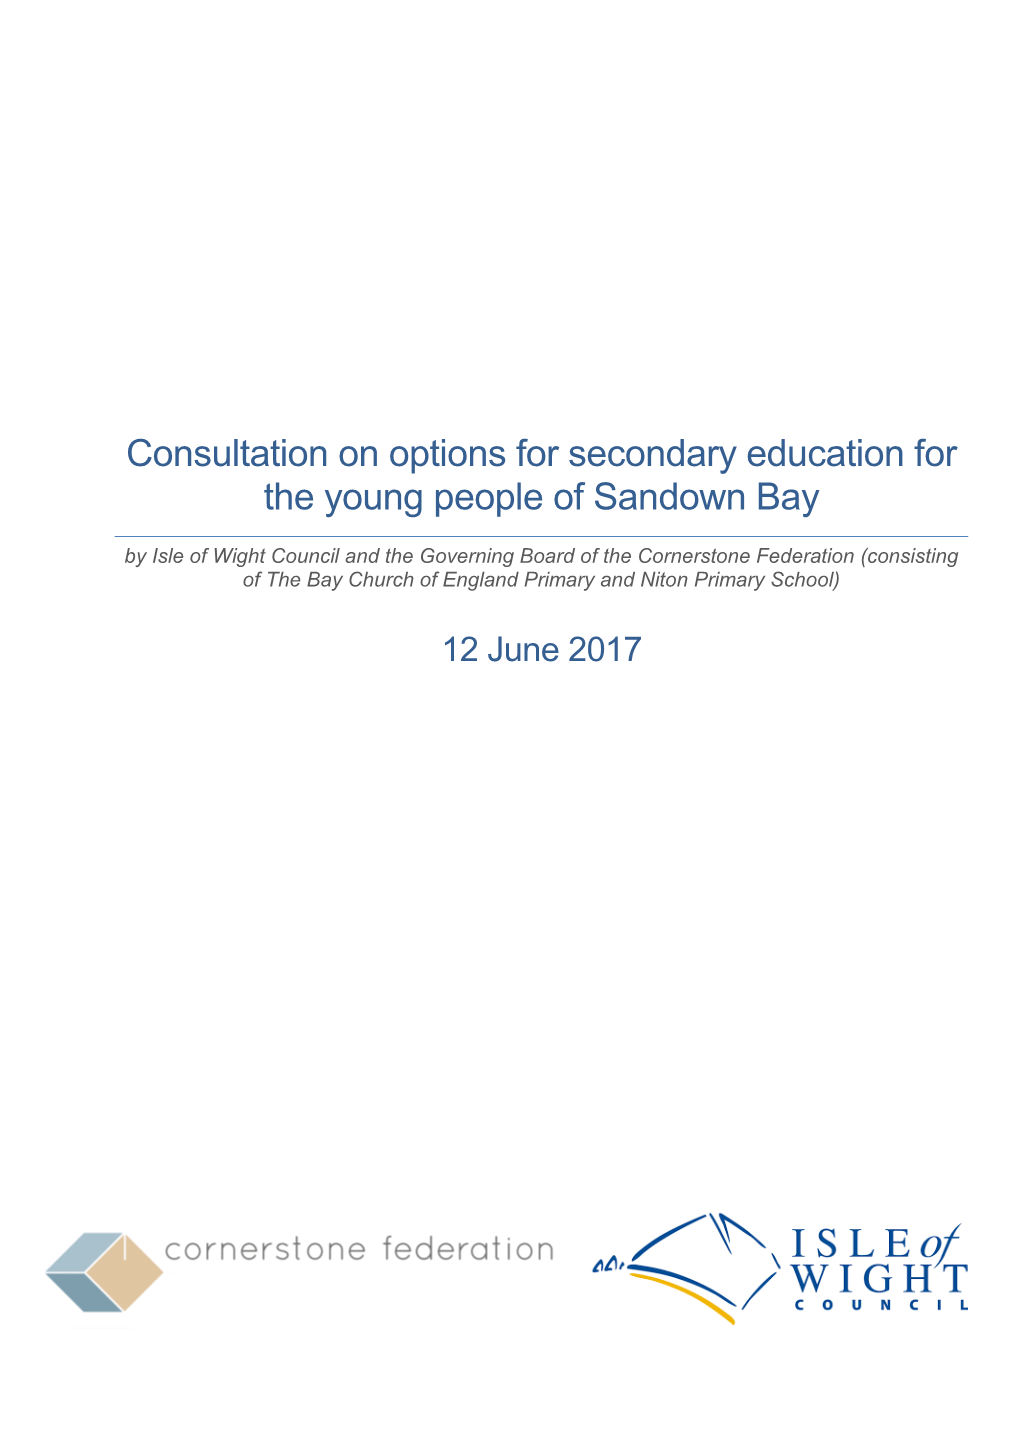 Consultation on Options for Secondary Education for the Young People of Sandown